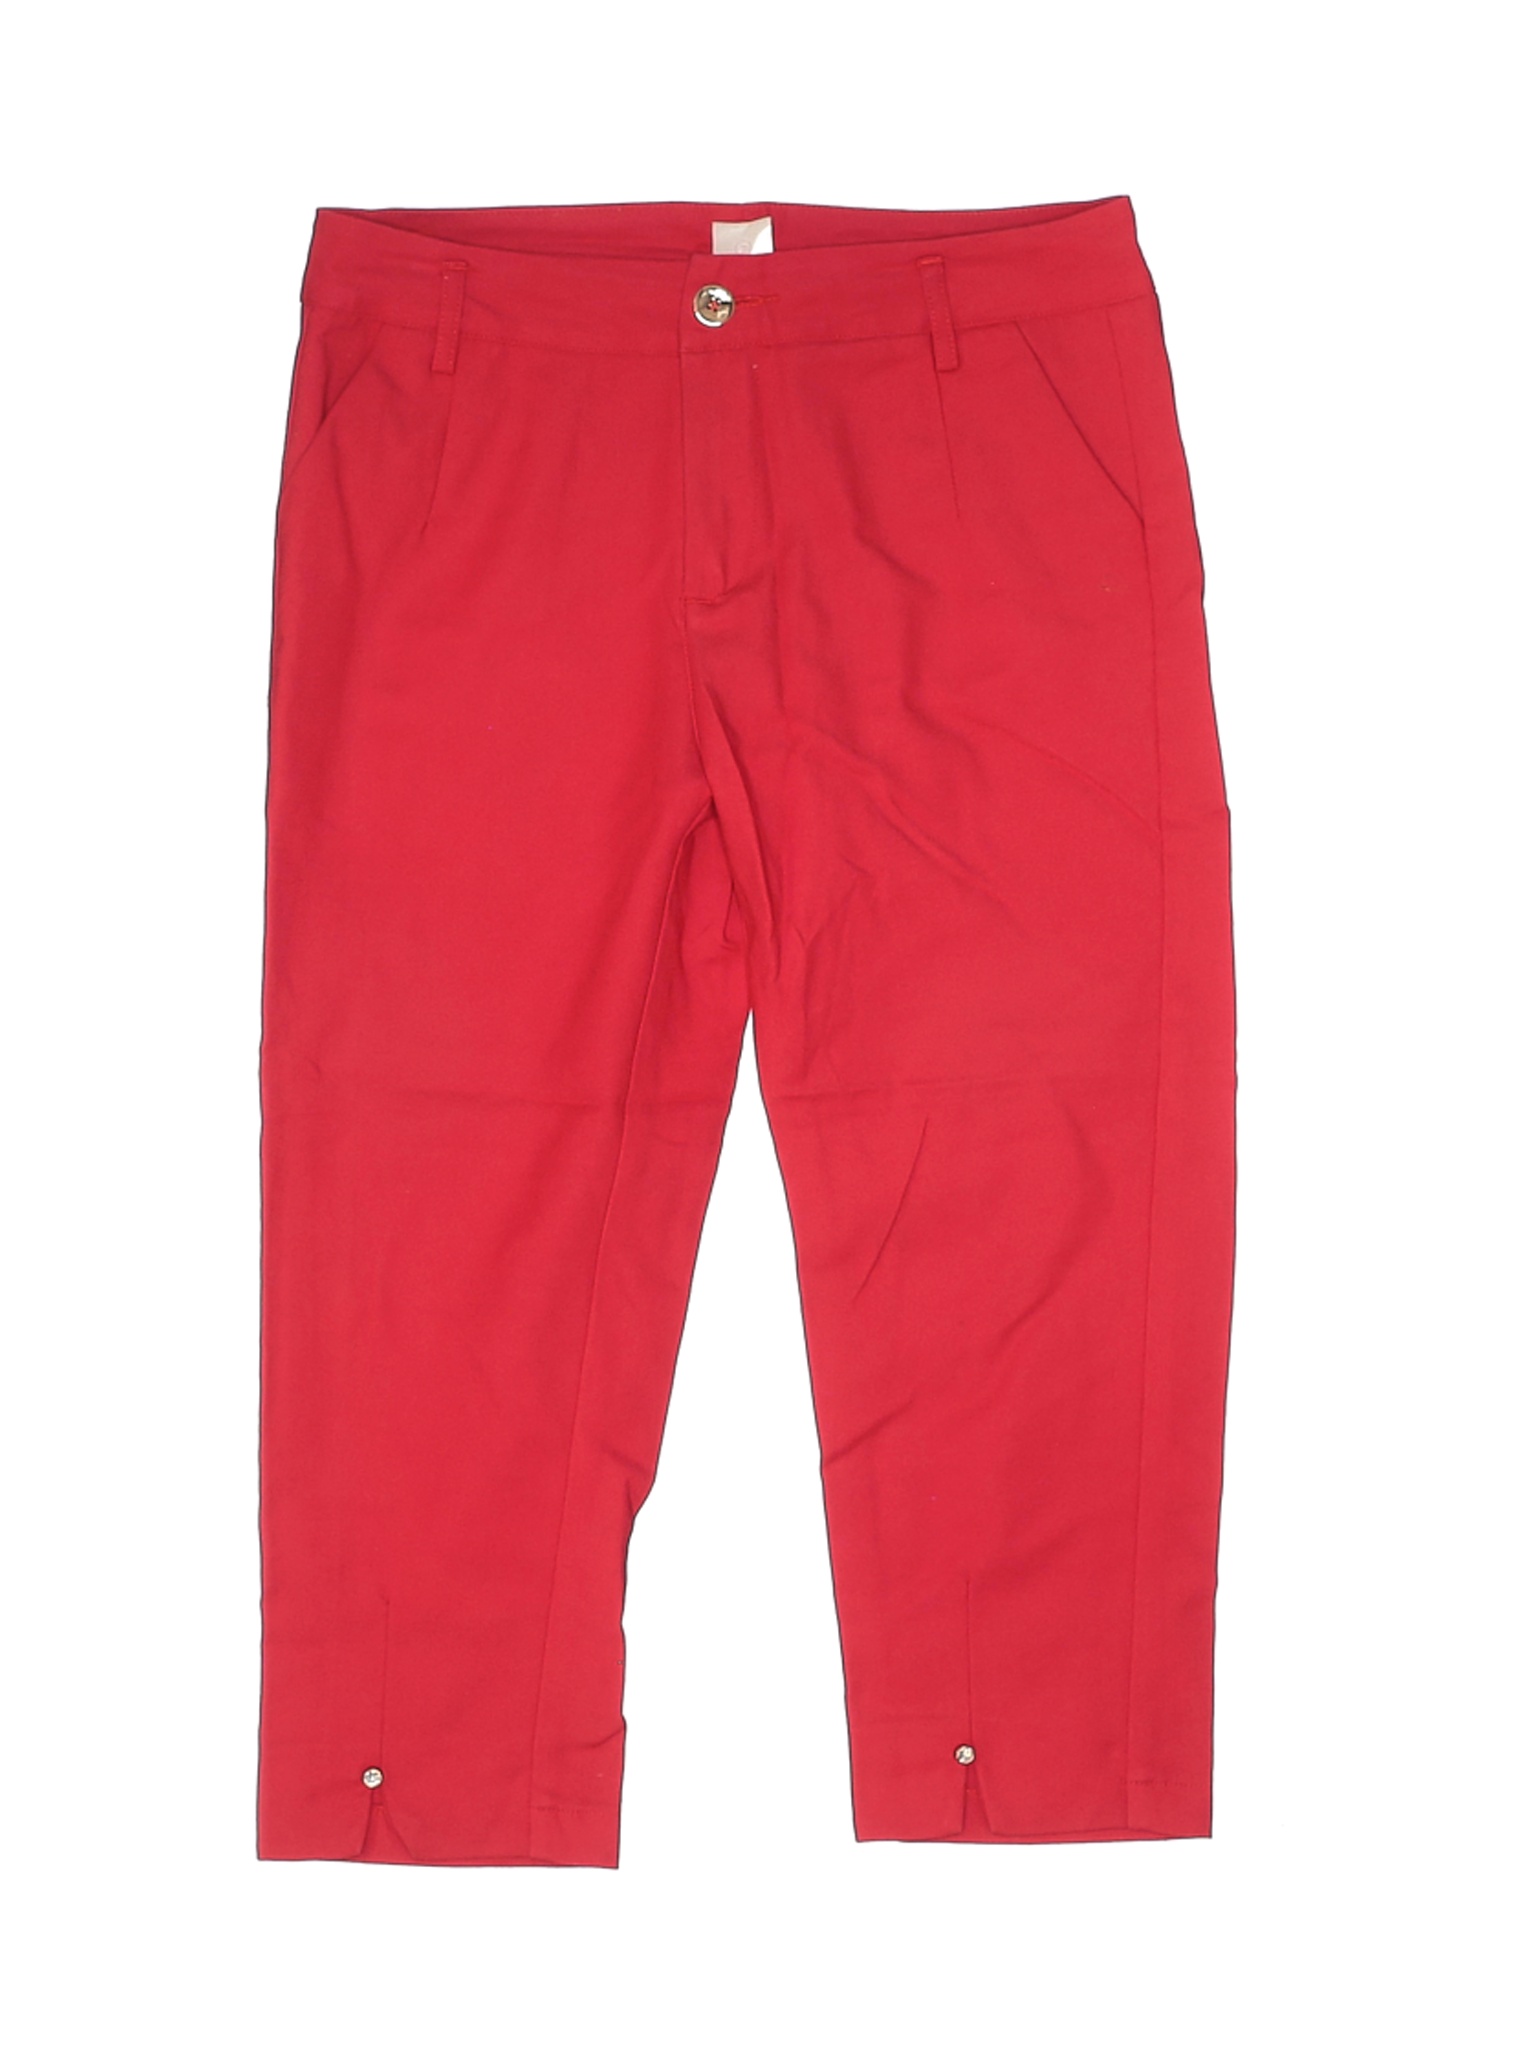 Assorted Brands Girls Red Casual Pants Large kids | eBay